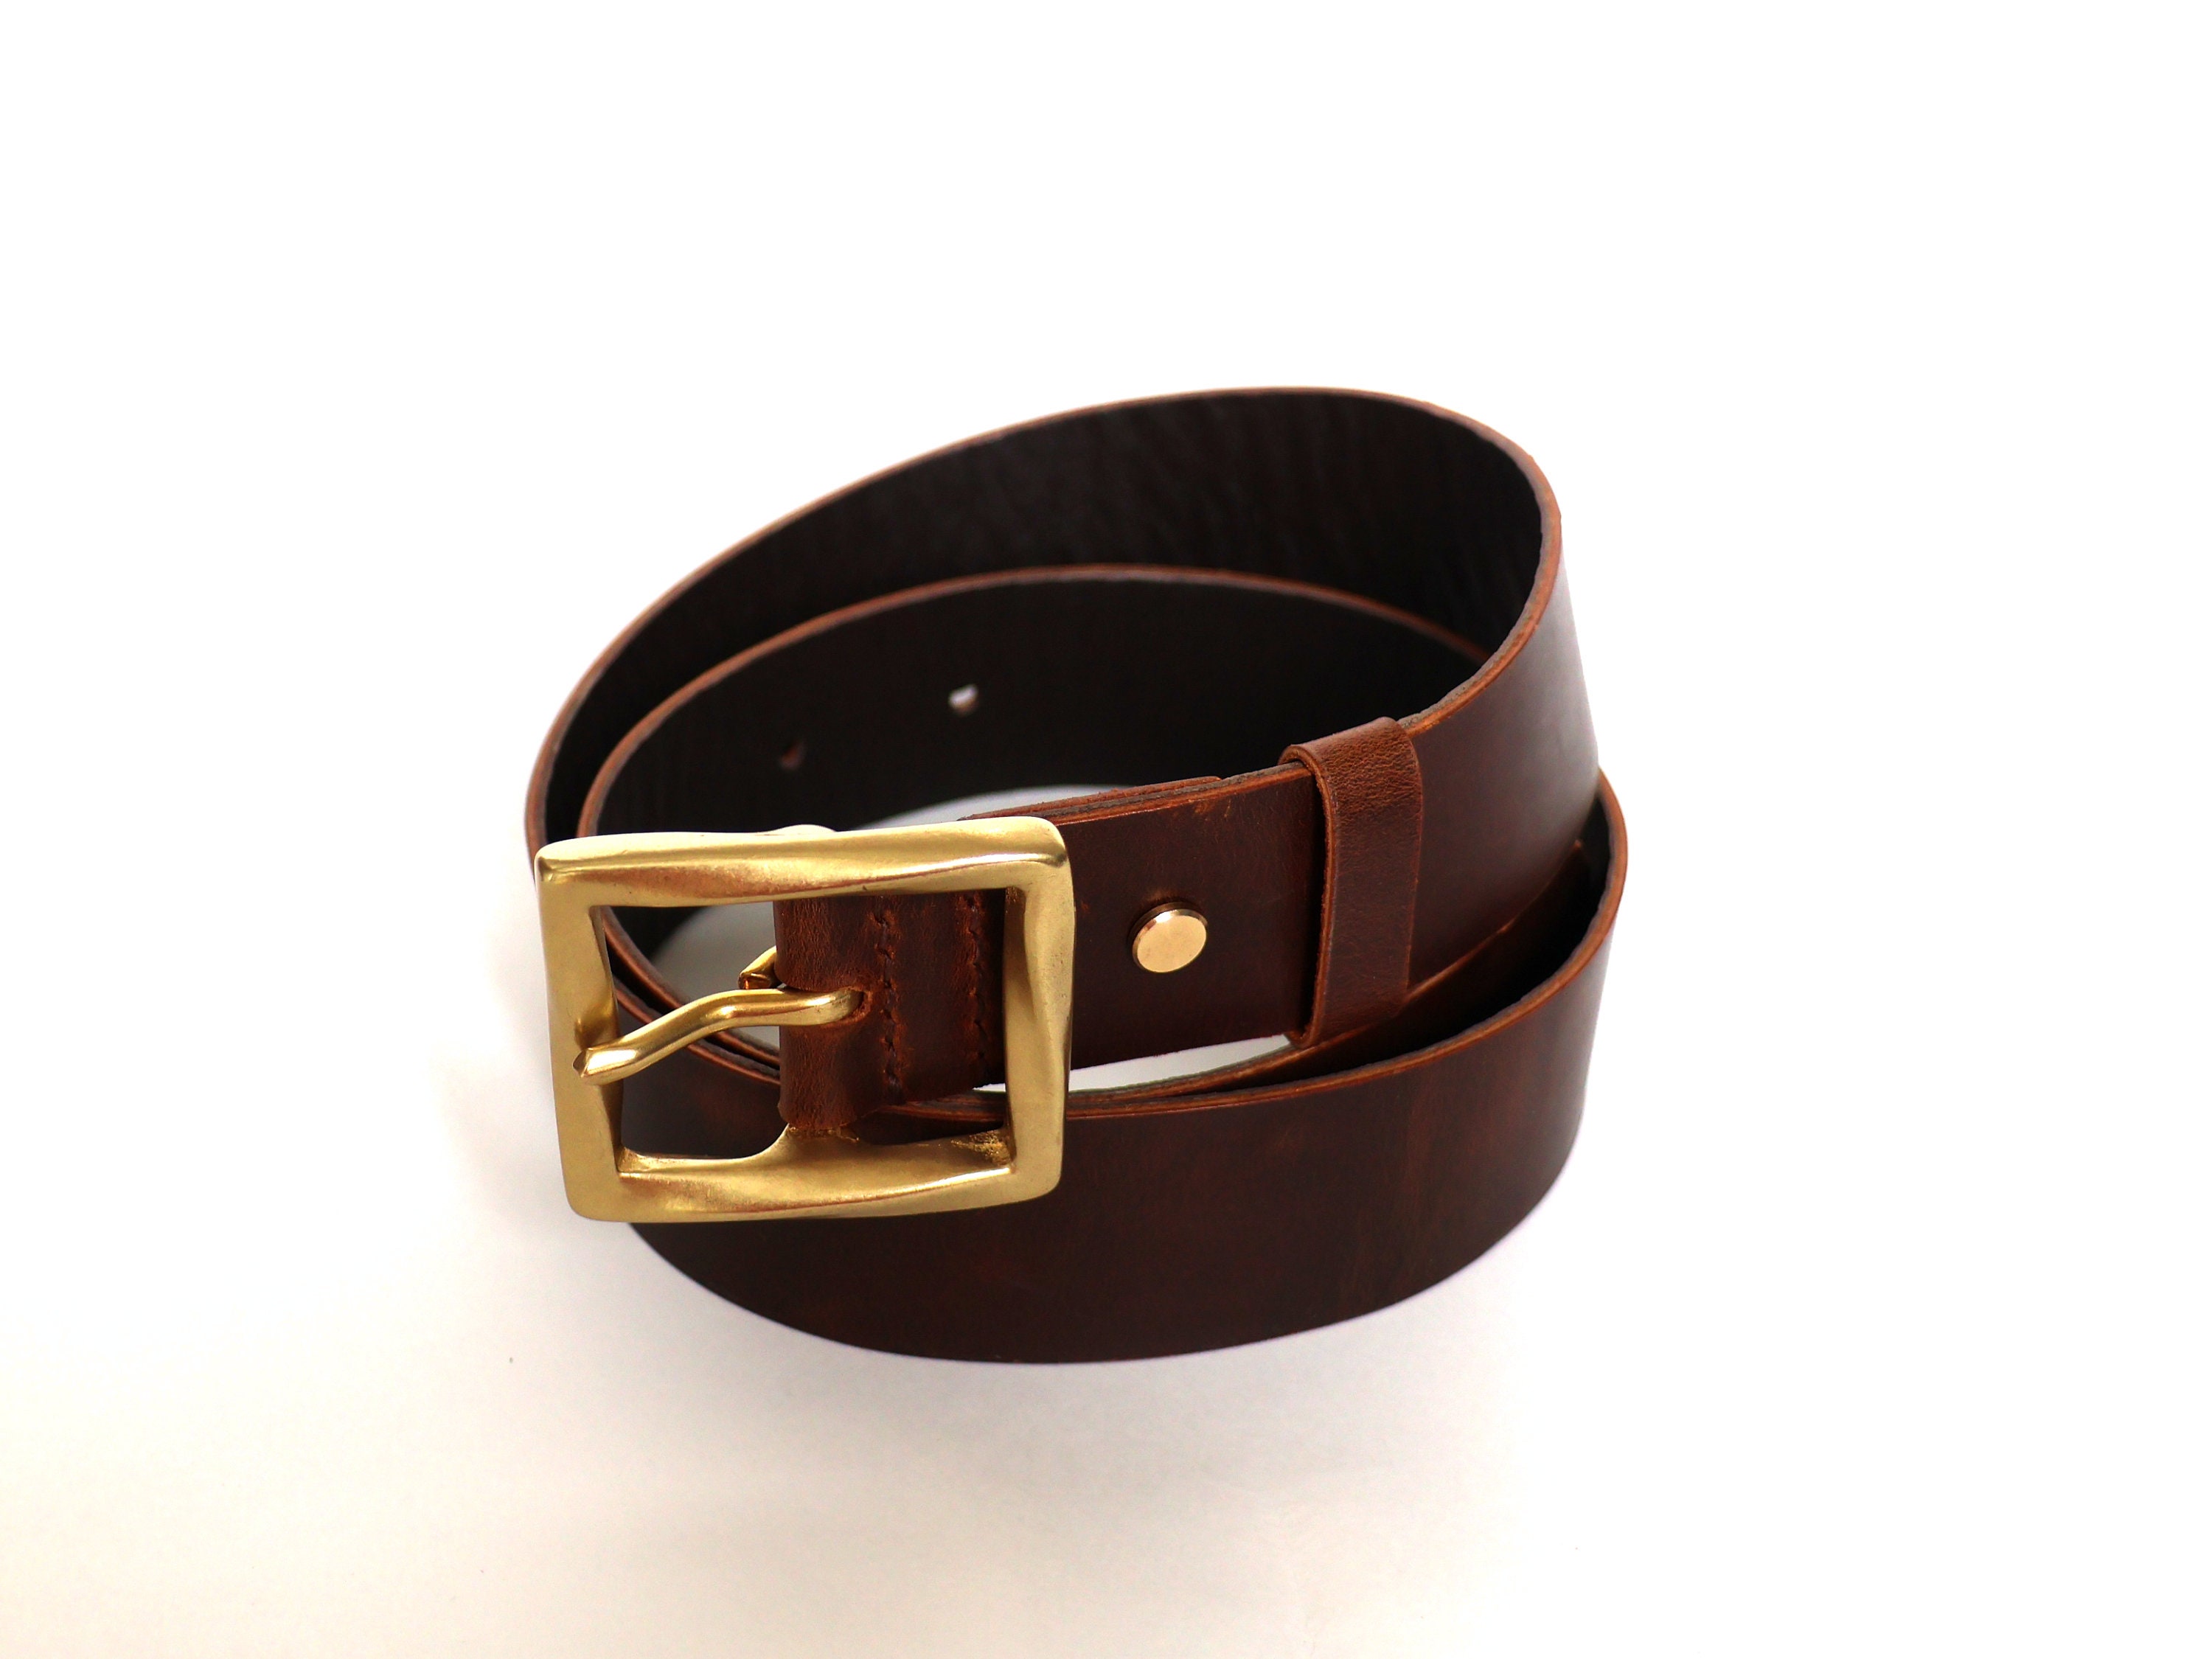 Lovely Brown Leather Belt Women, Leather Waist Belt, Antique Brass Buckle,  Chocolate Brown Leather Belt 